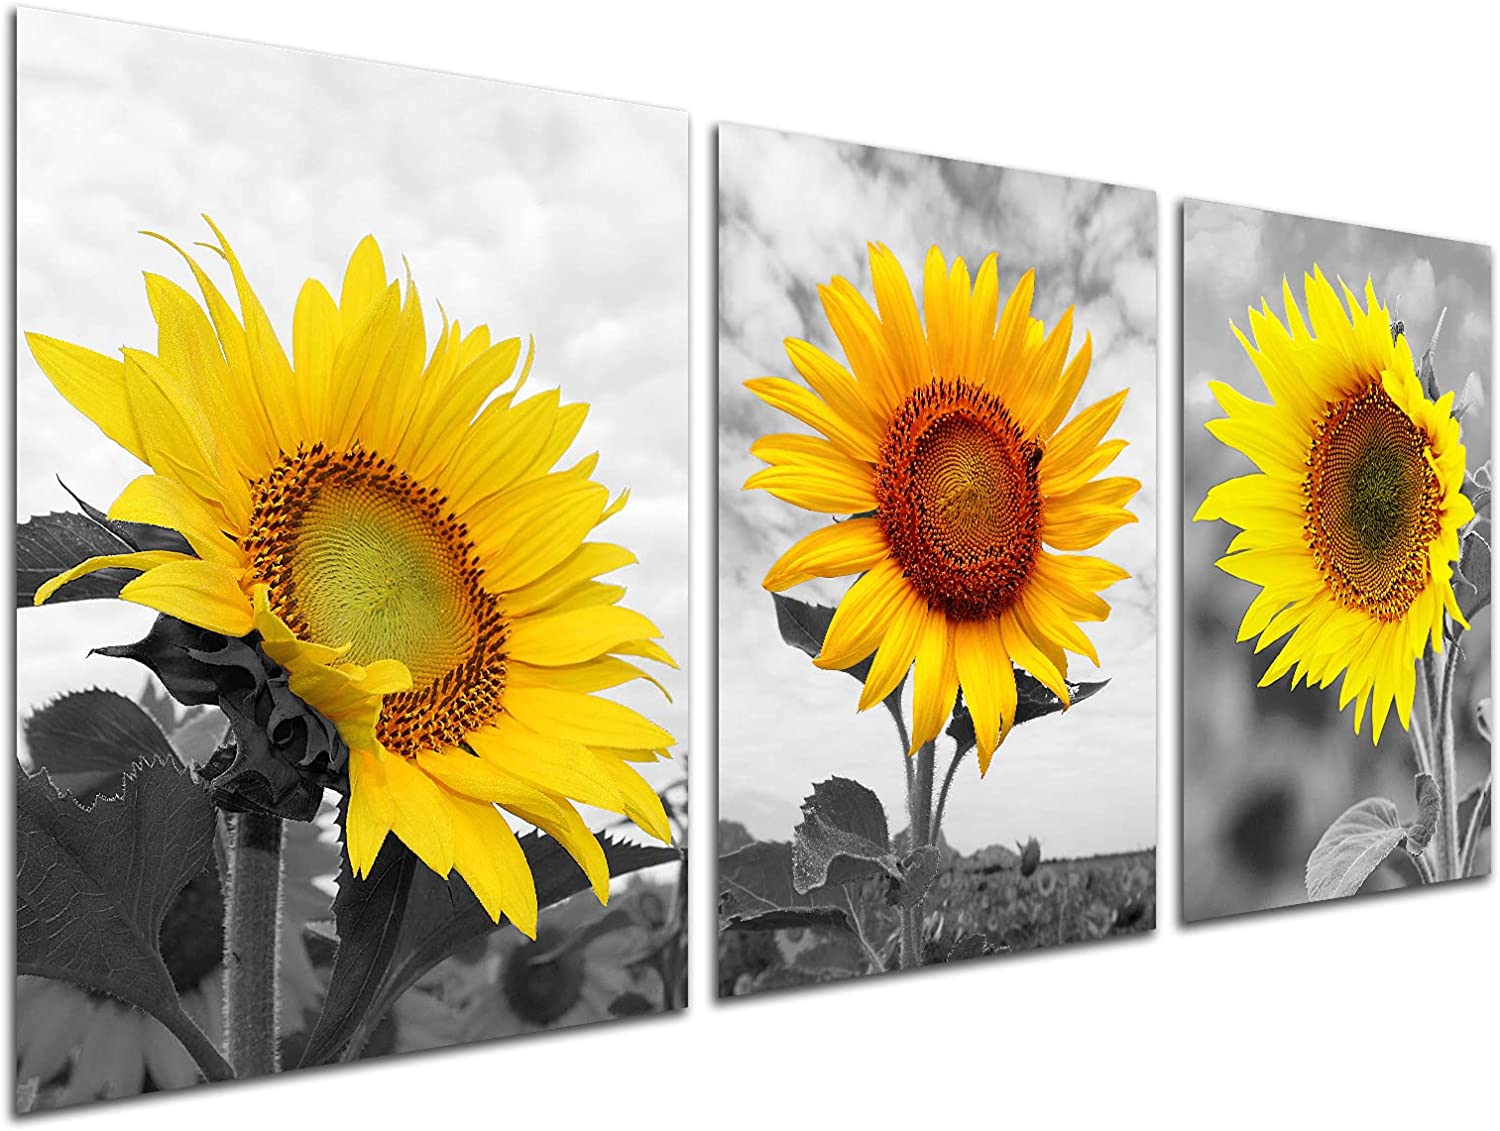 Get Inspired By the Wide Range of Sunflower Designs